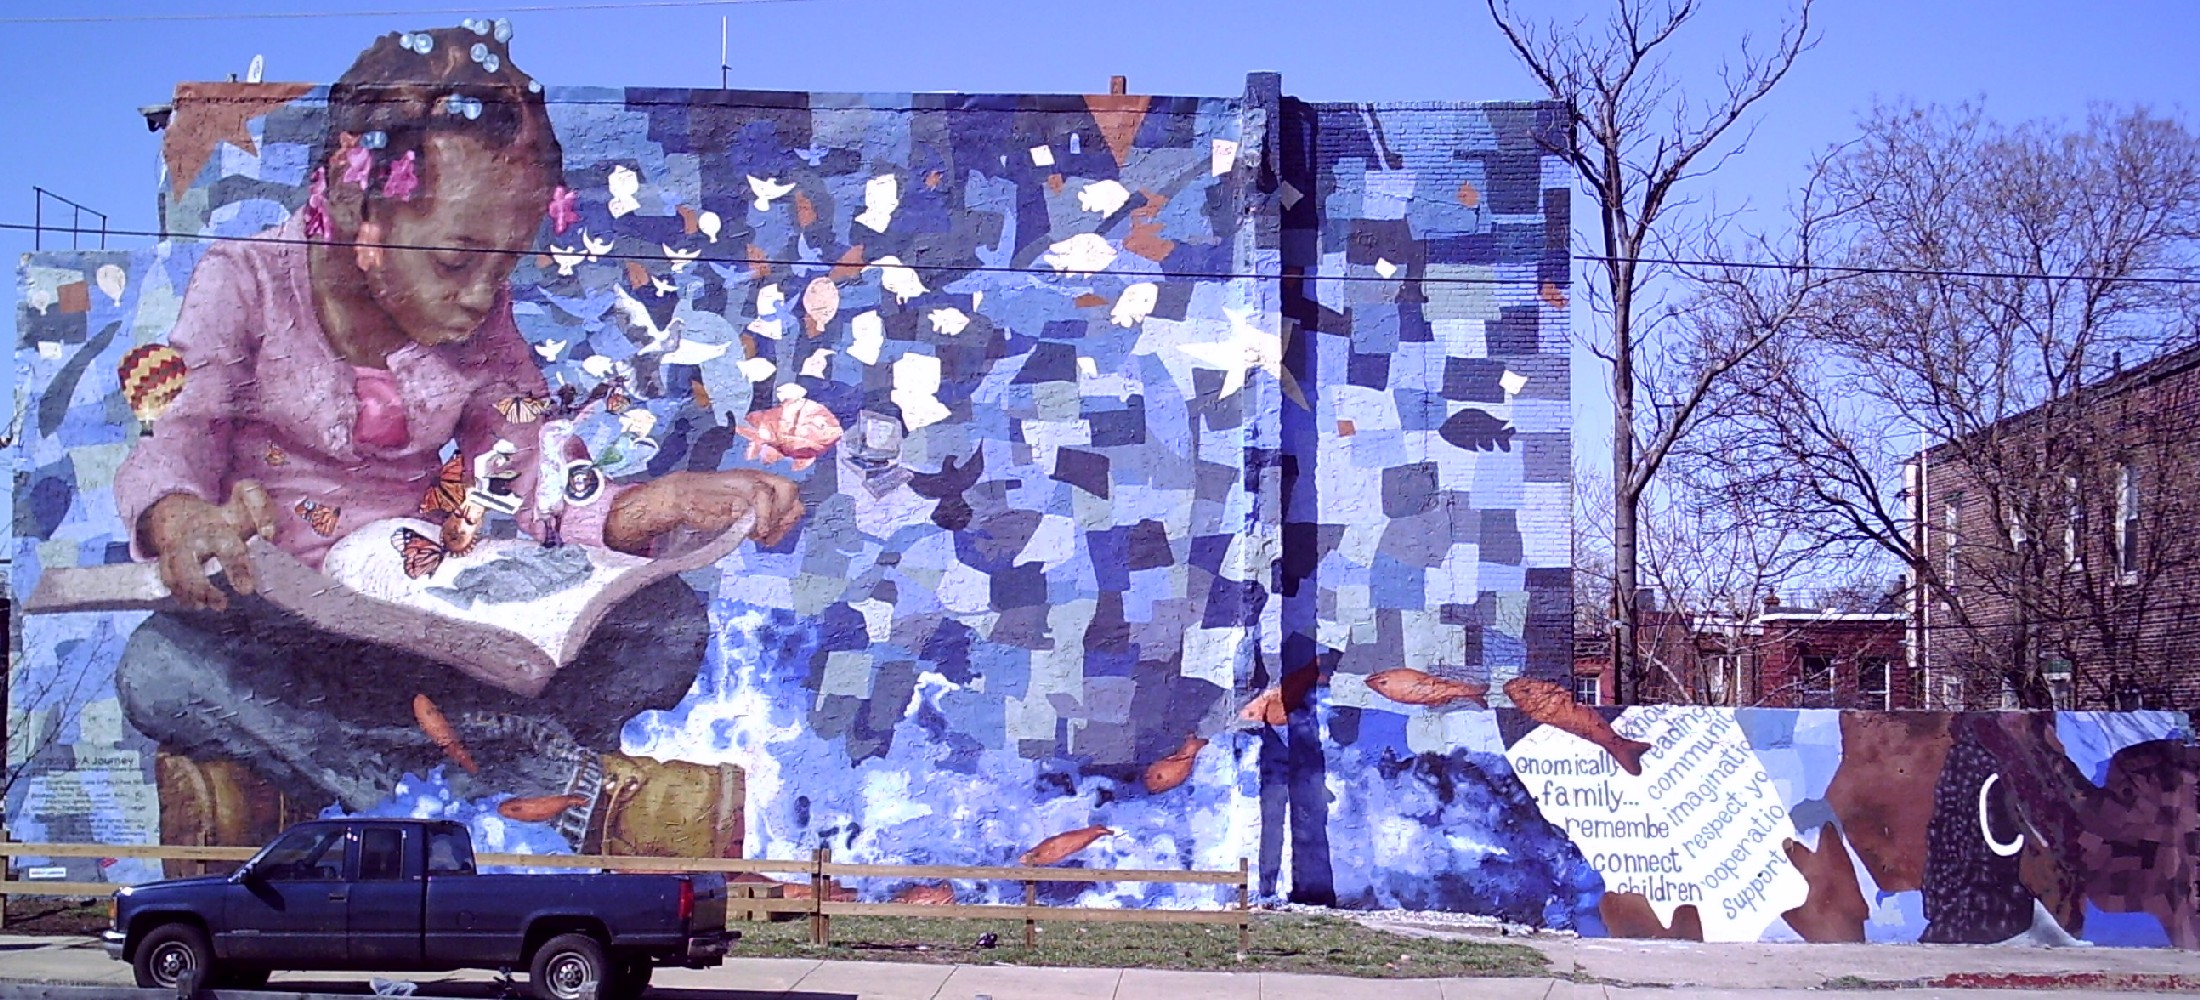 A mural painted onto a wall of a little girl reading a book